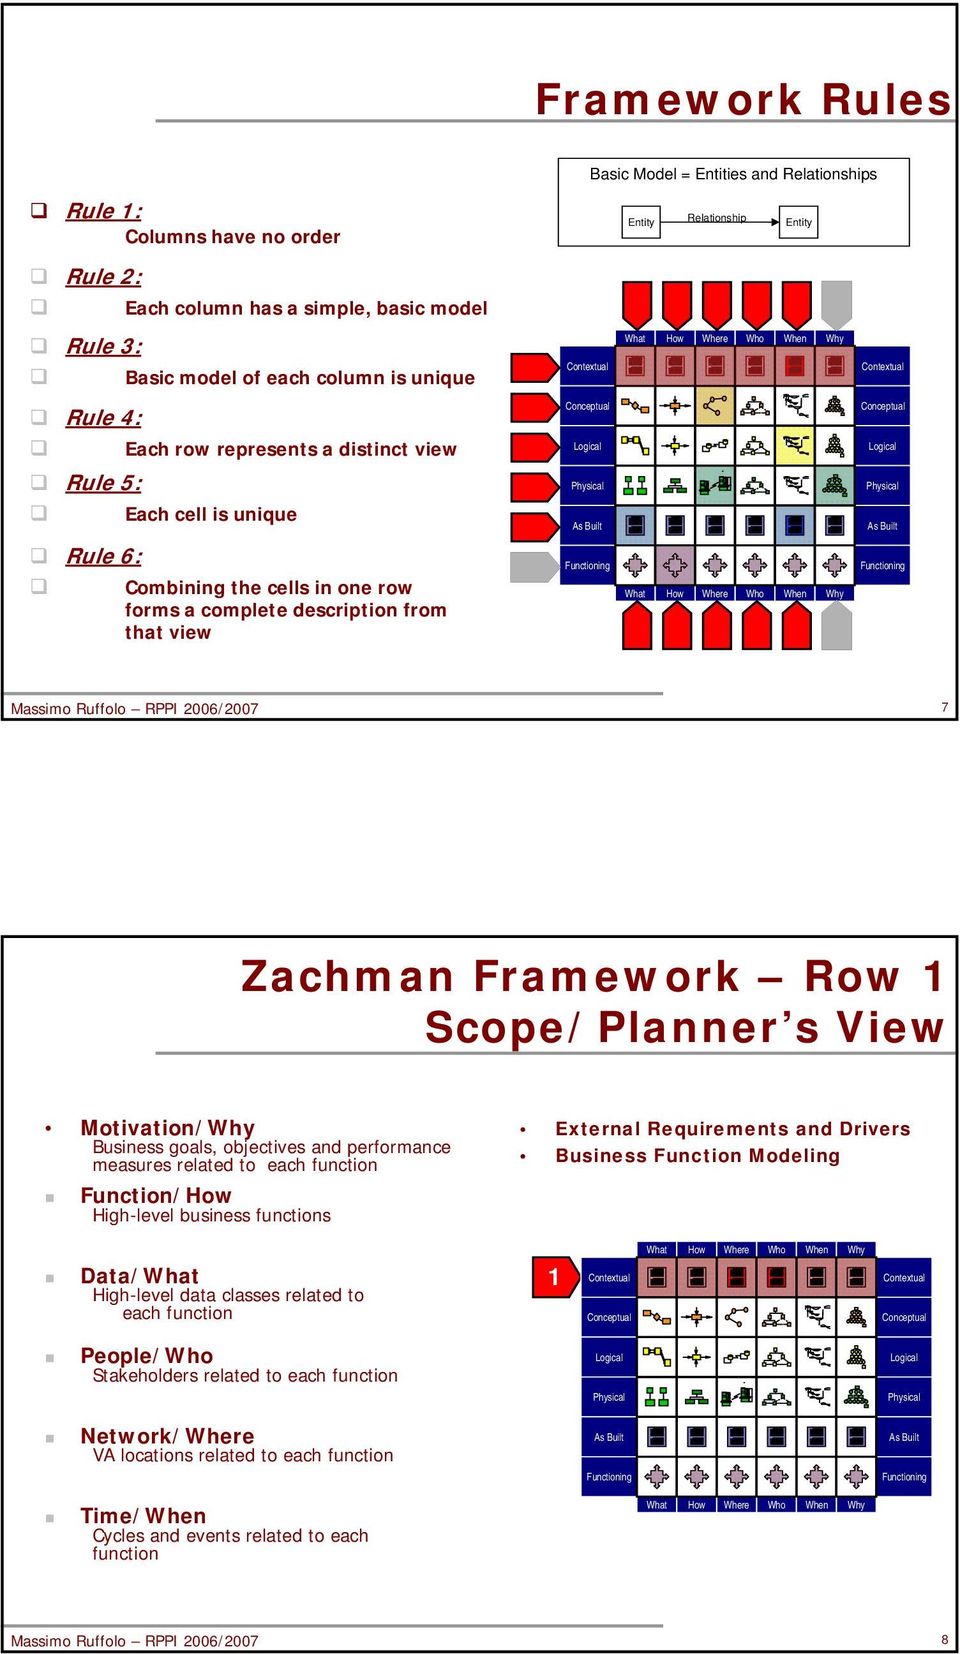 Zachman Framework Row 1 Scope/Planner s View Motivation/ Business goals, objectives and performance measures related to each function Function/ High-level business functions External Requirements and